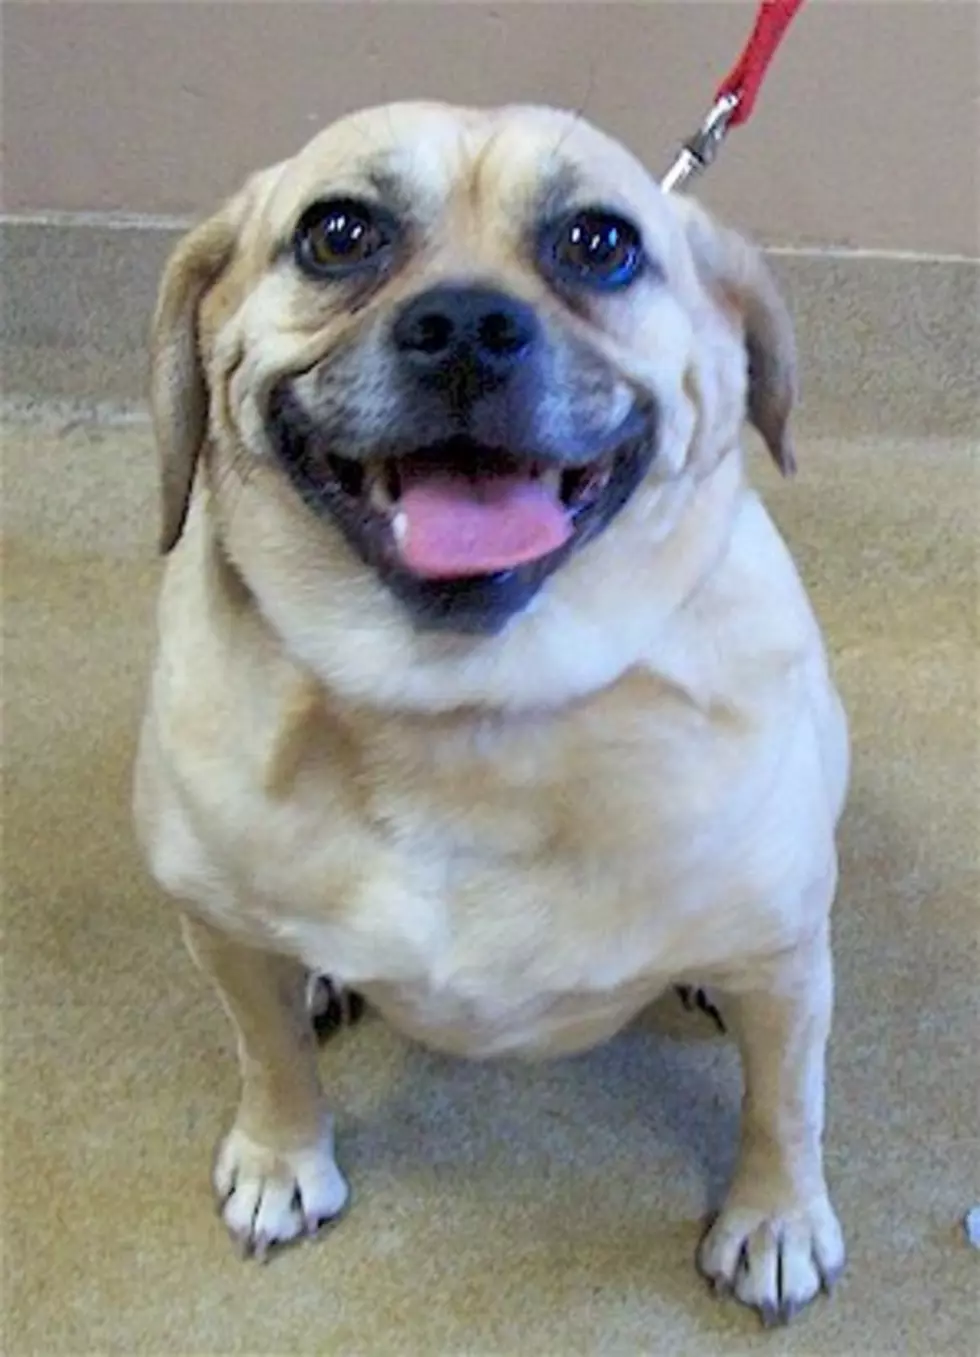 Pet Patrol: Kida the Puggle&#8217;s Looking for New Digs